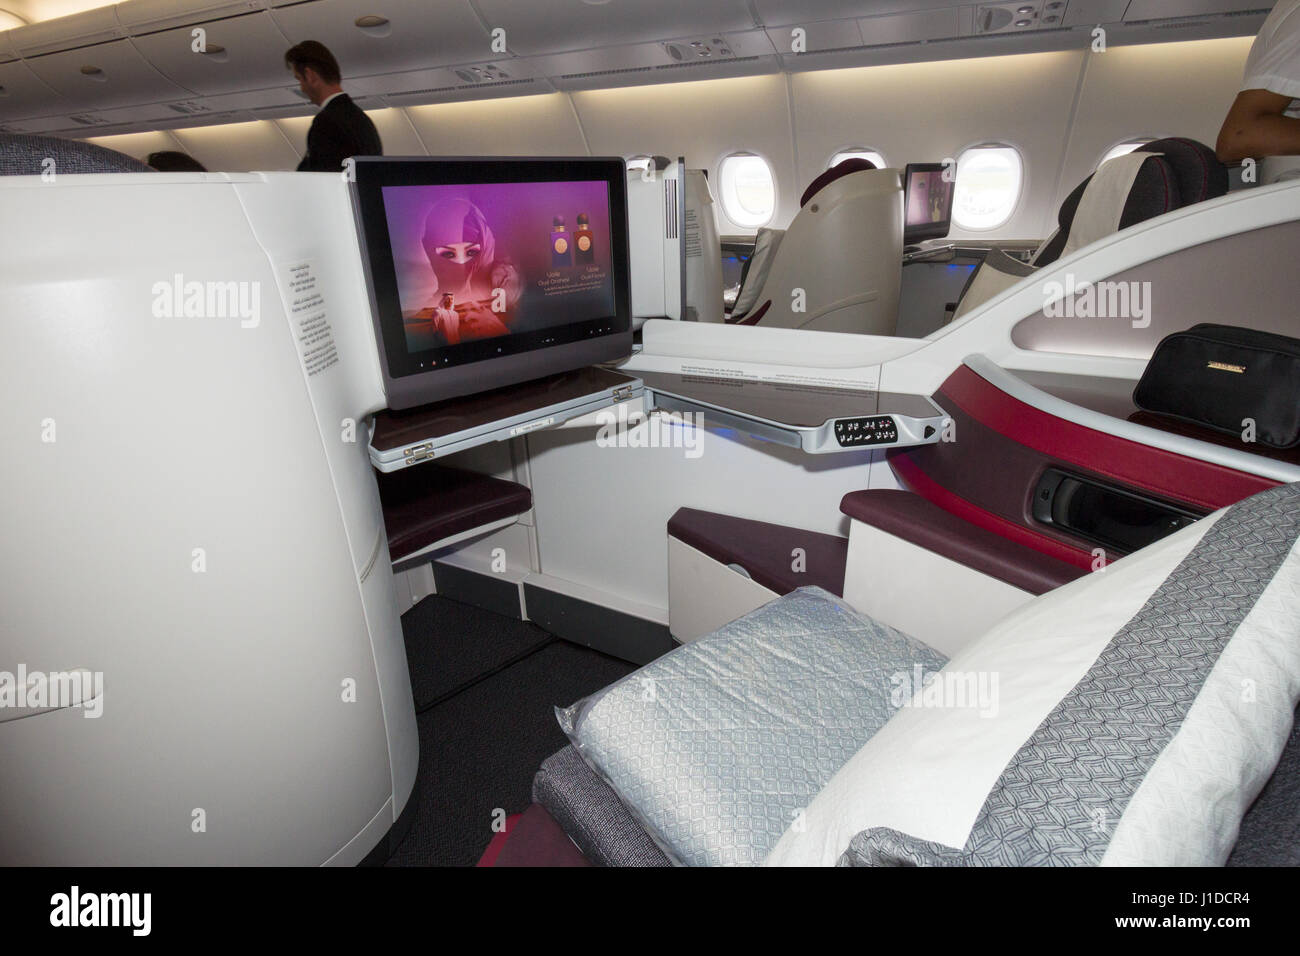 PARIS - JUN 18, 2015: Layout of the Business Class cabin of a Qatar Airways Airbus A380 airplane. Stock Photo